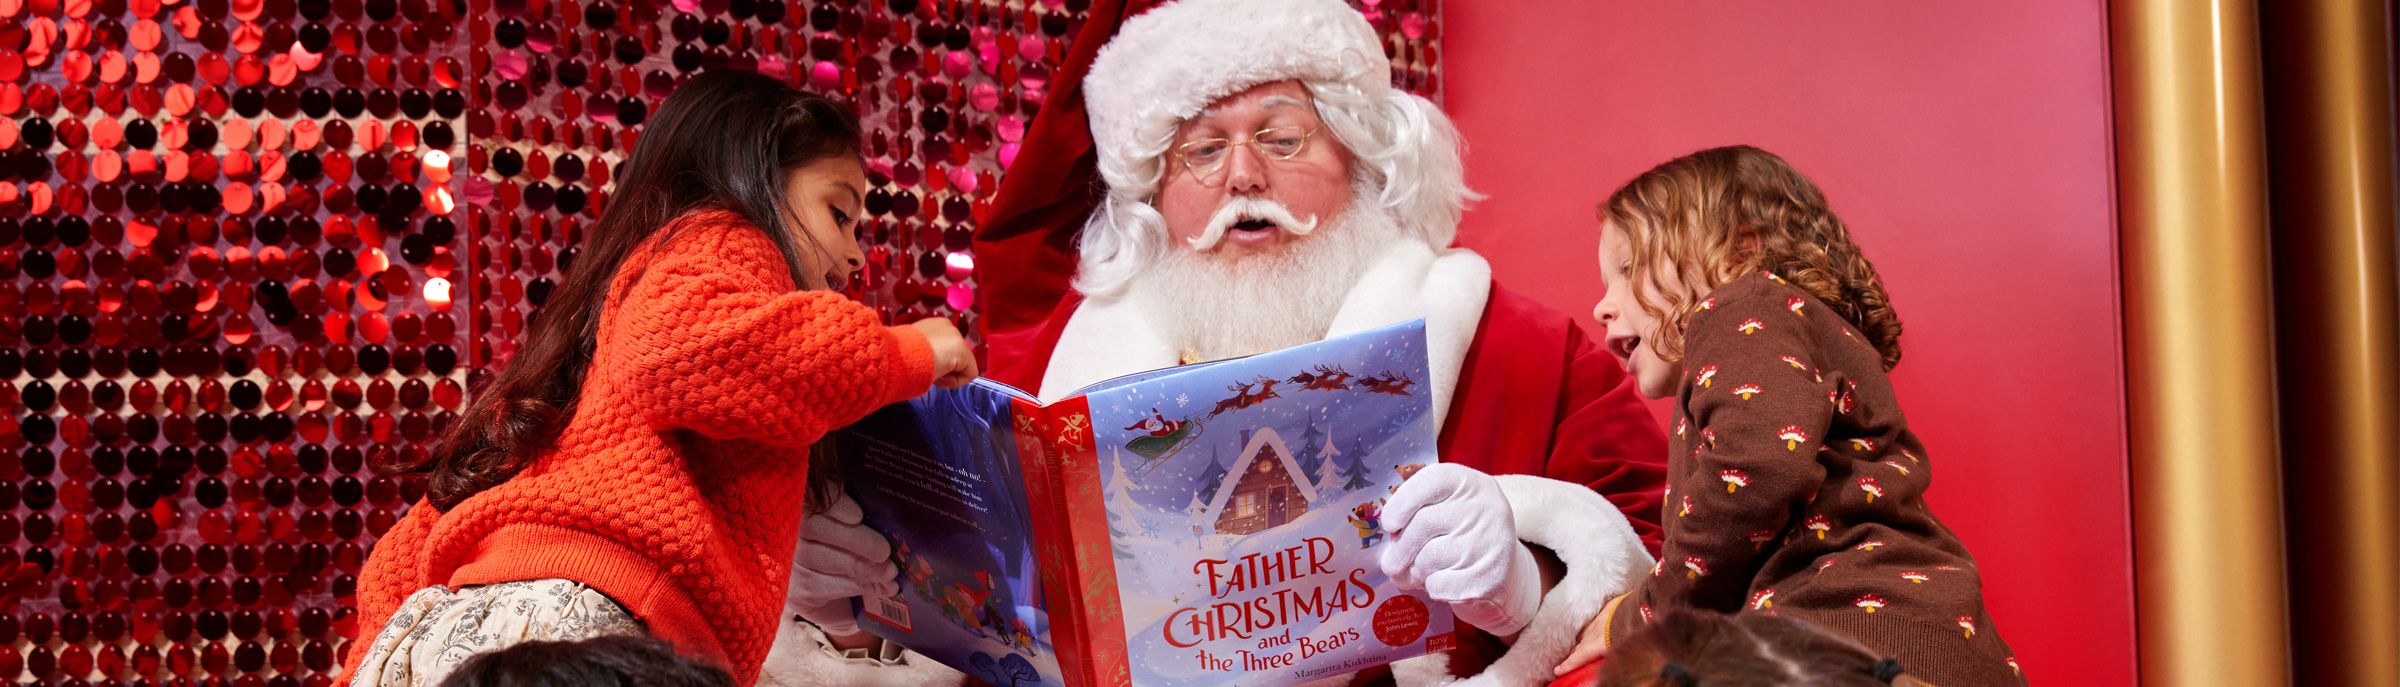 Image of a santa reading a Christmas book to children, with a red sparkly backdrop